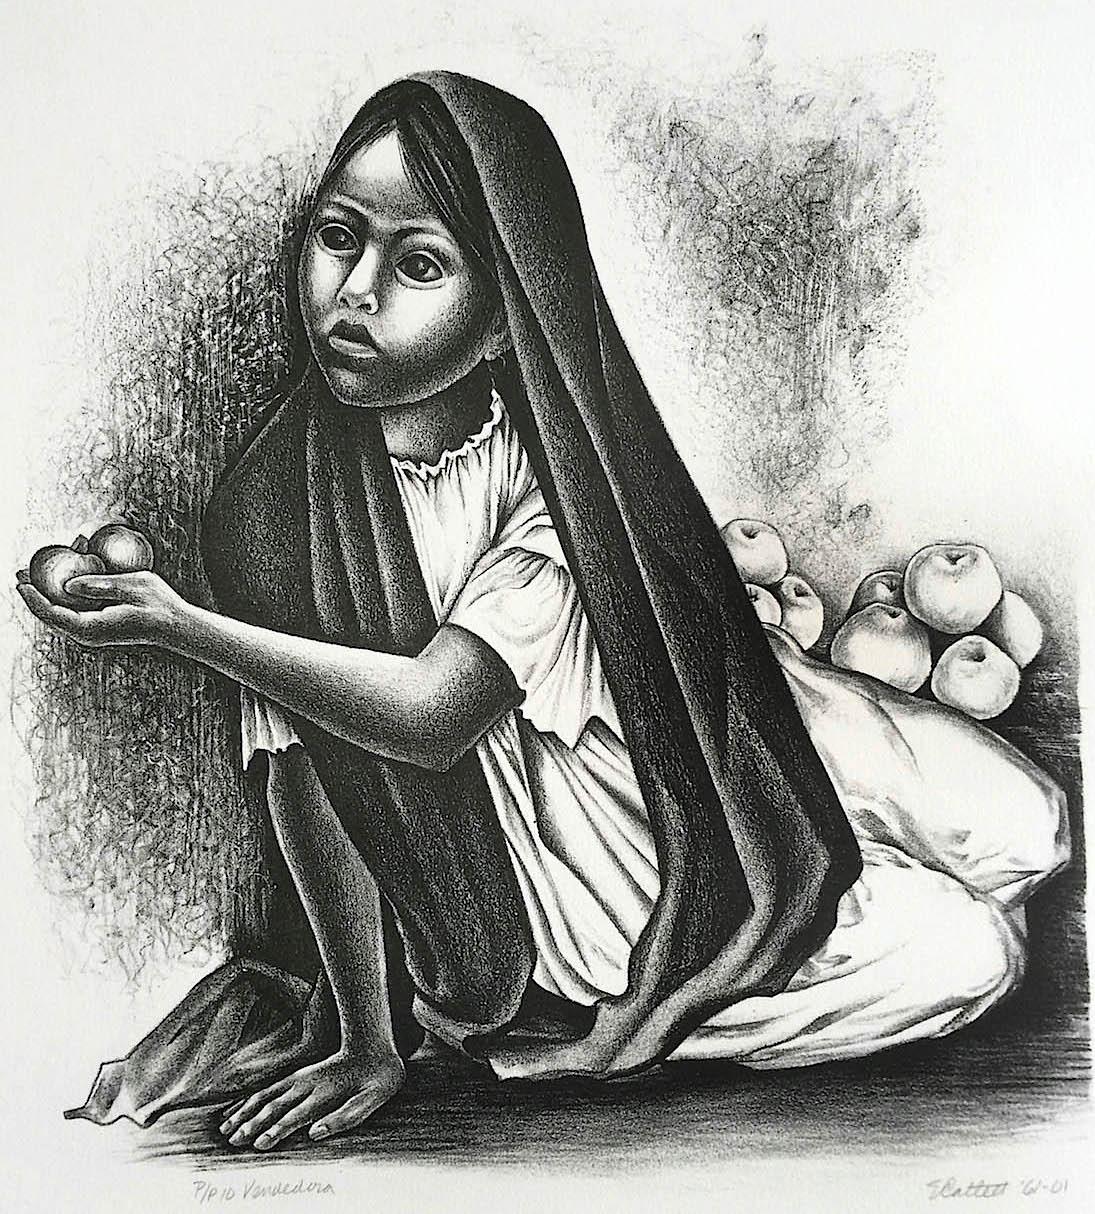 VENDEDORA Signed Lithograph, Portrait Seated Young Girl, Mexican Fruit Seller - Print by Elizabeth Catlett